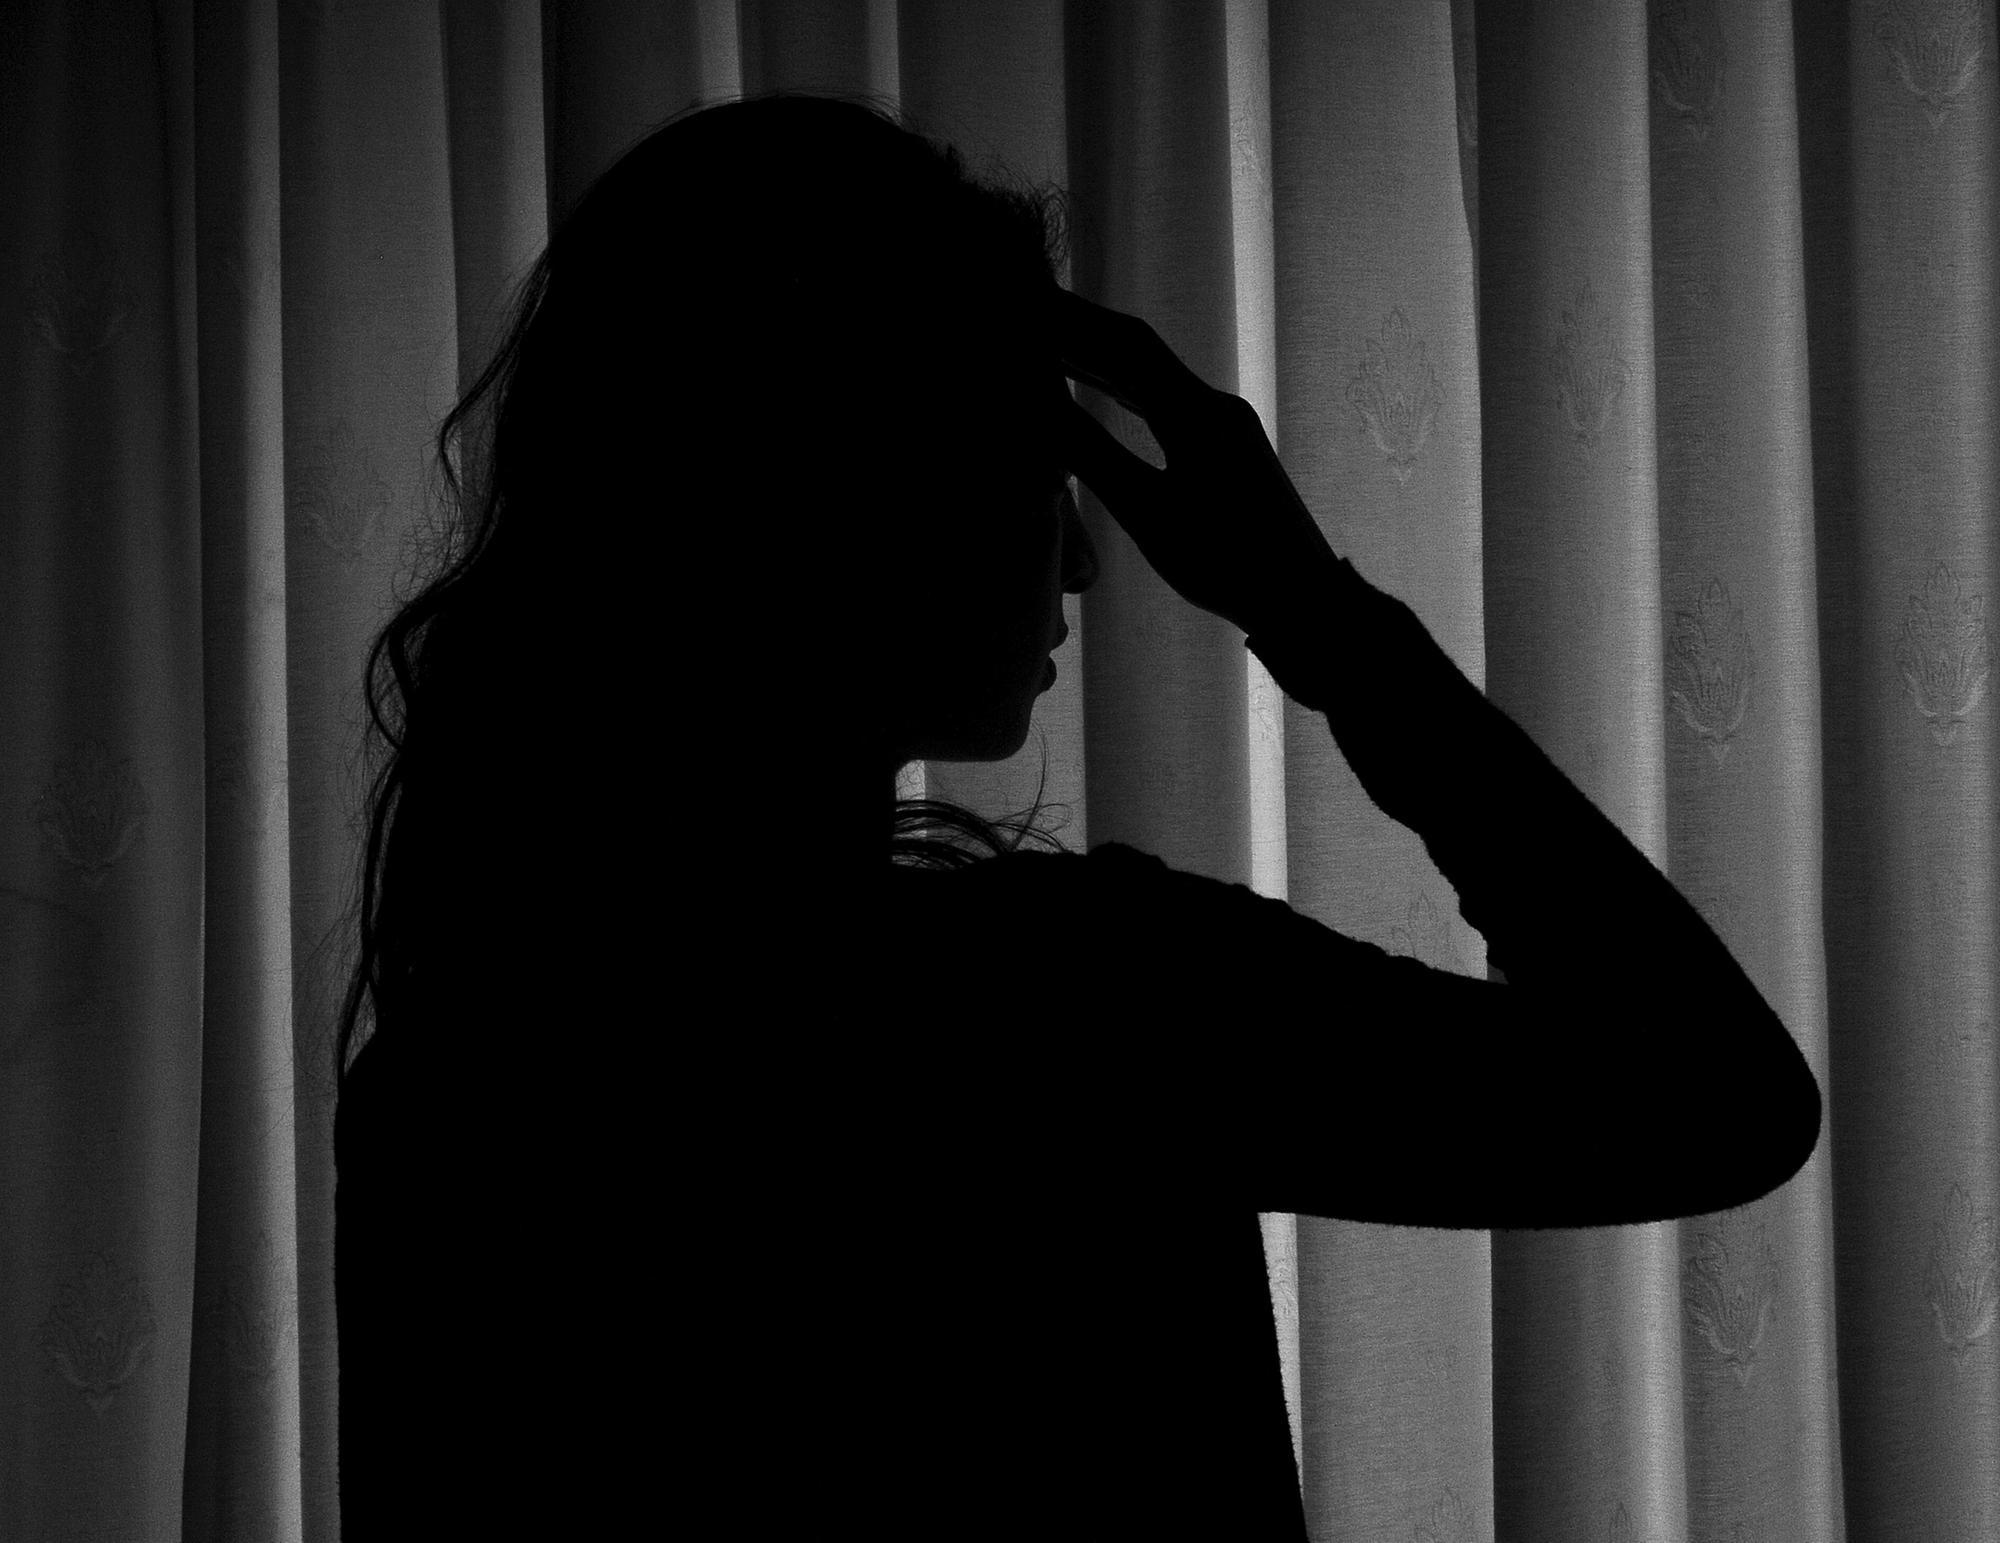 Fewer potential slavery victims were referred to Nottinghamshire Police last year